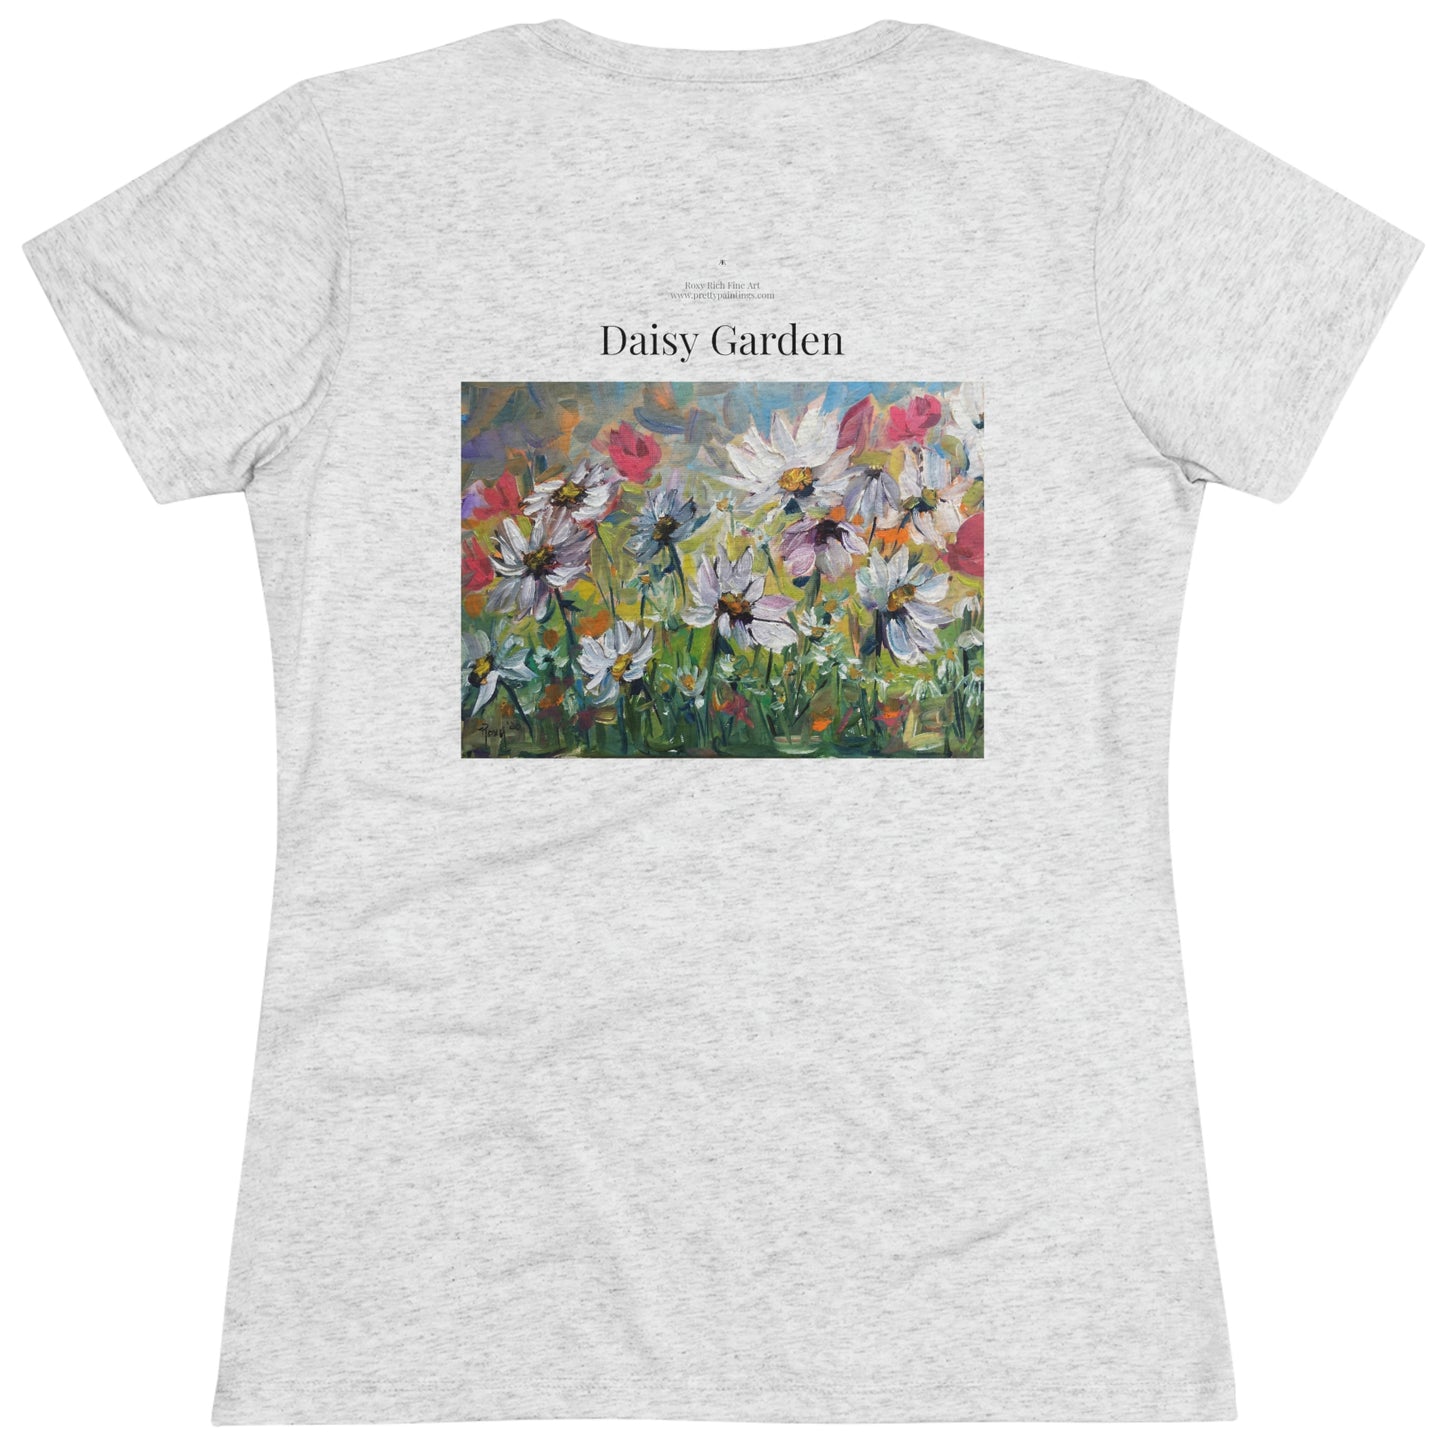 Daisy Garden (image on back) Women's fitted Triblend Tee  tee shirt